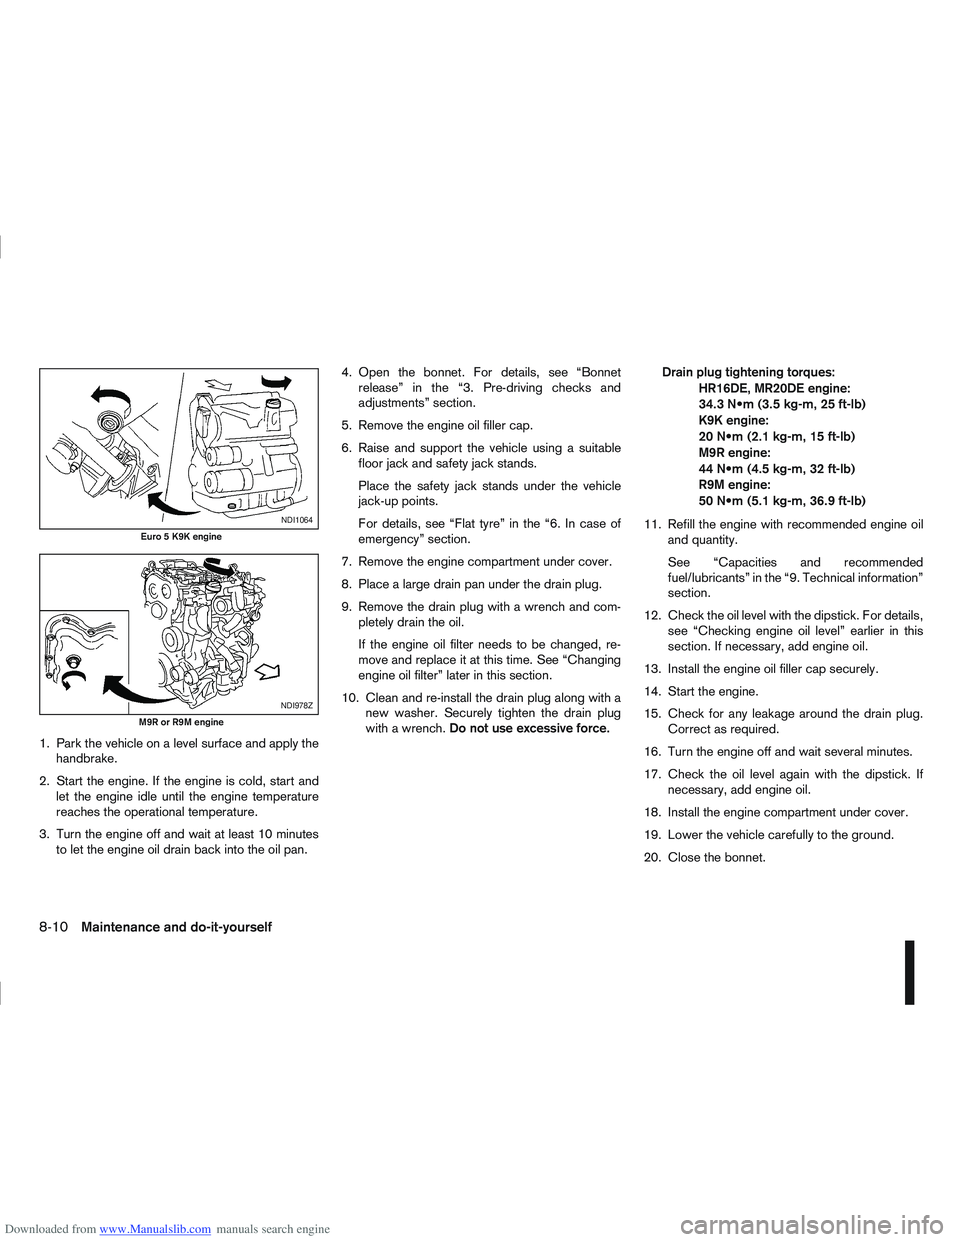 NISSAN QASHQAI 2006  Owners Manual Downloaded from www.Manualslib.com manuals search engine 1. Park the vehicle on a level surface and apply thehandbrake.
2. Start the engine. If the engine is cold, start and let the engine idle until 